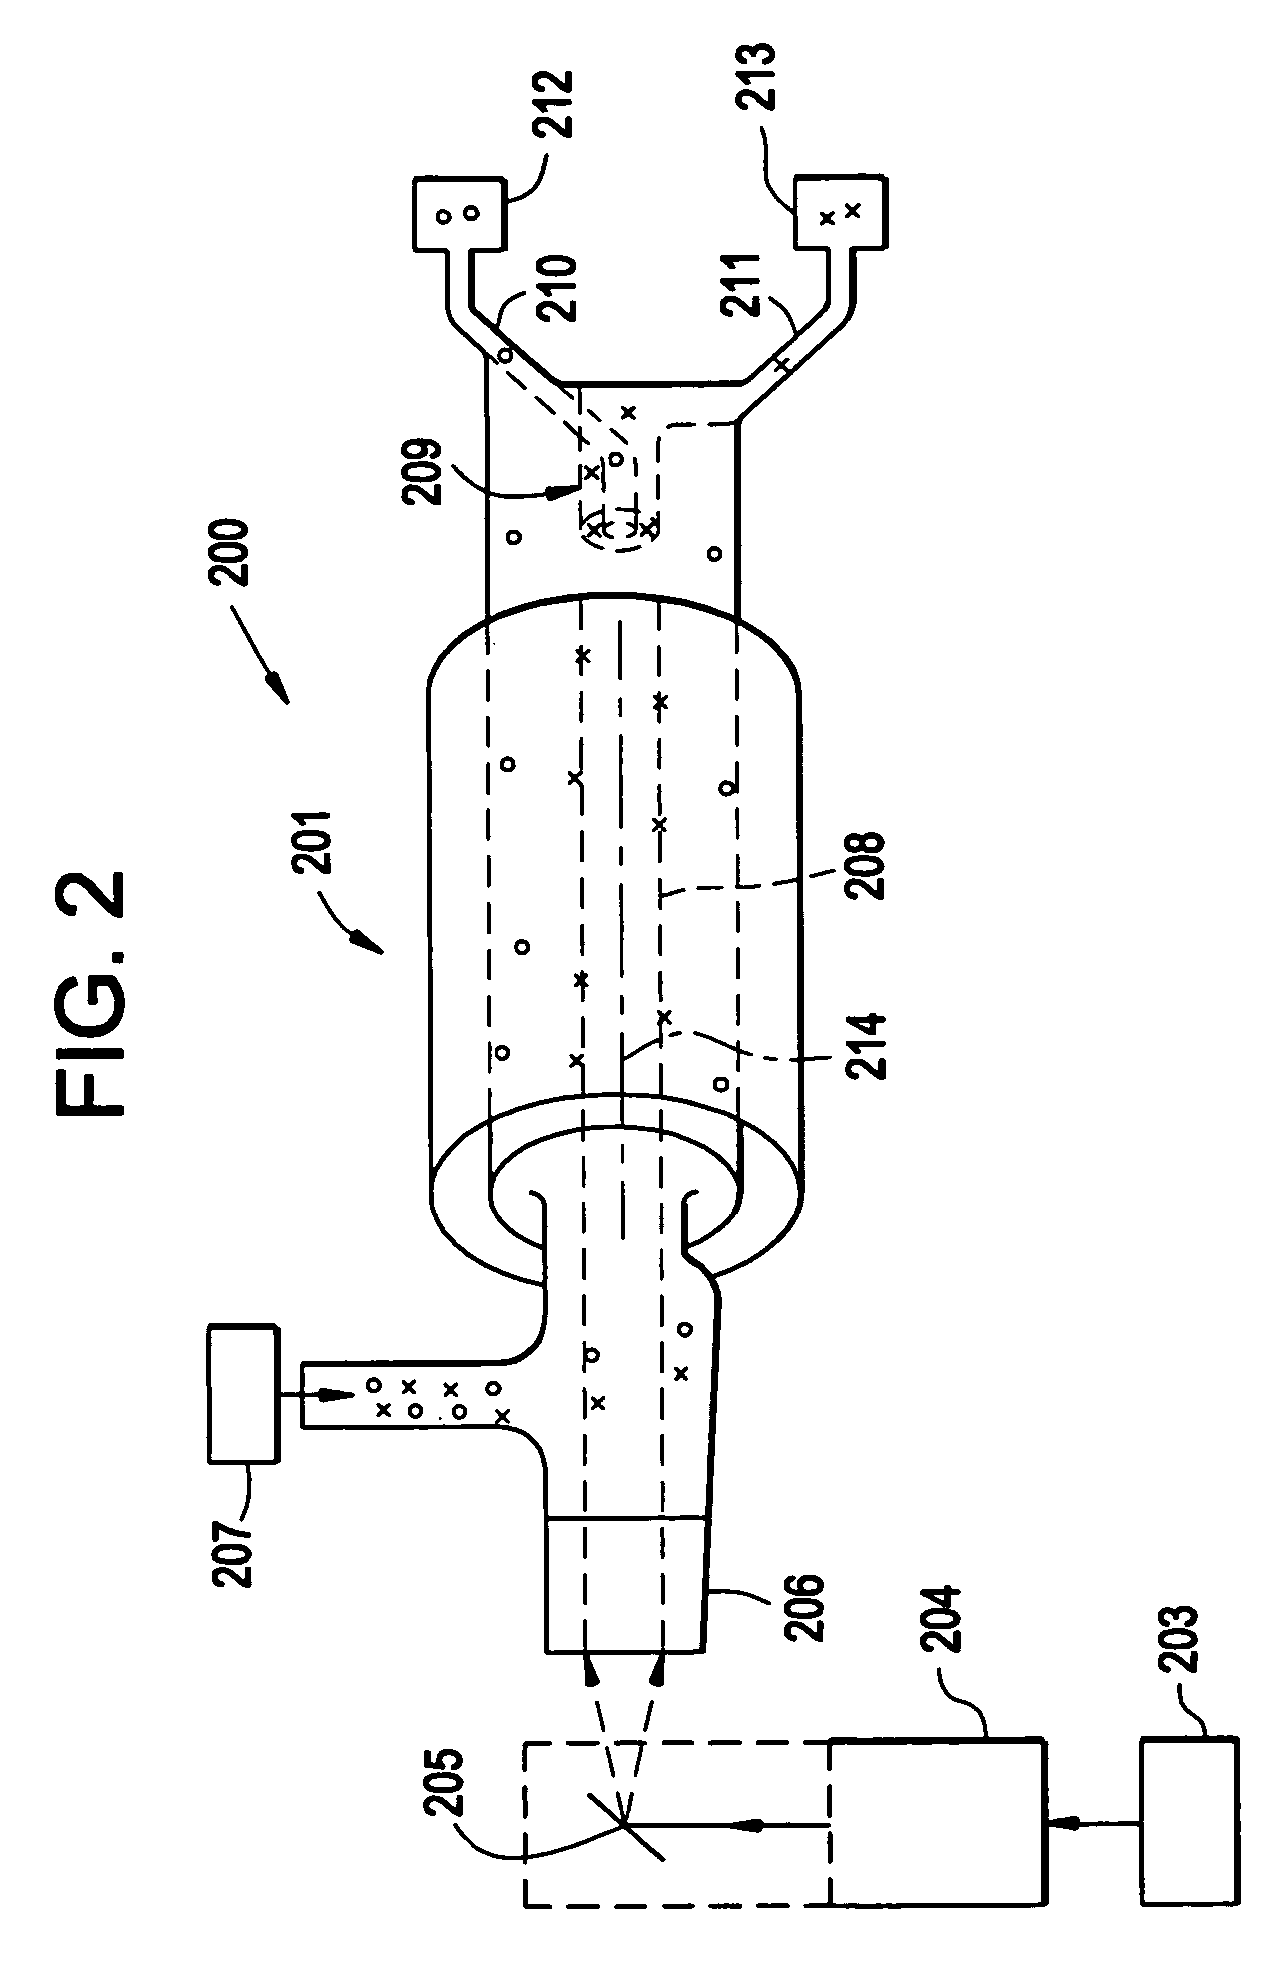 Apparatus for optically-based sorting within liquid core waveguides